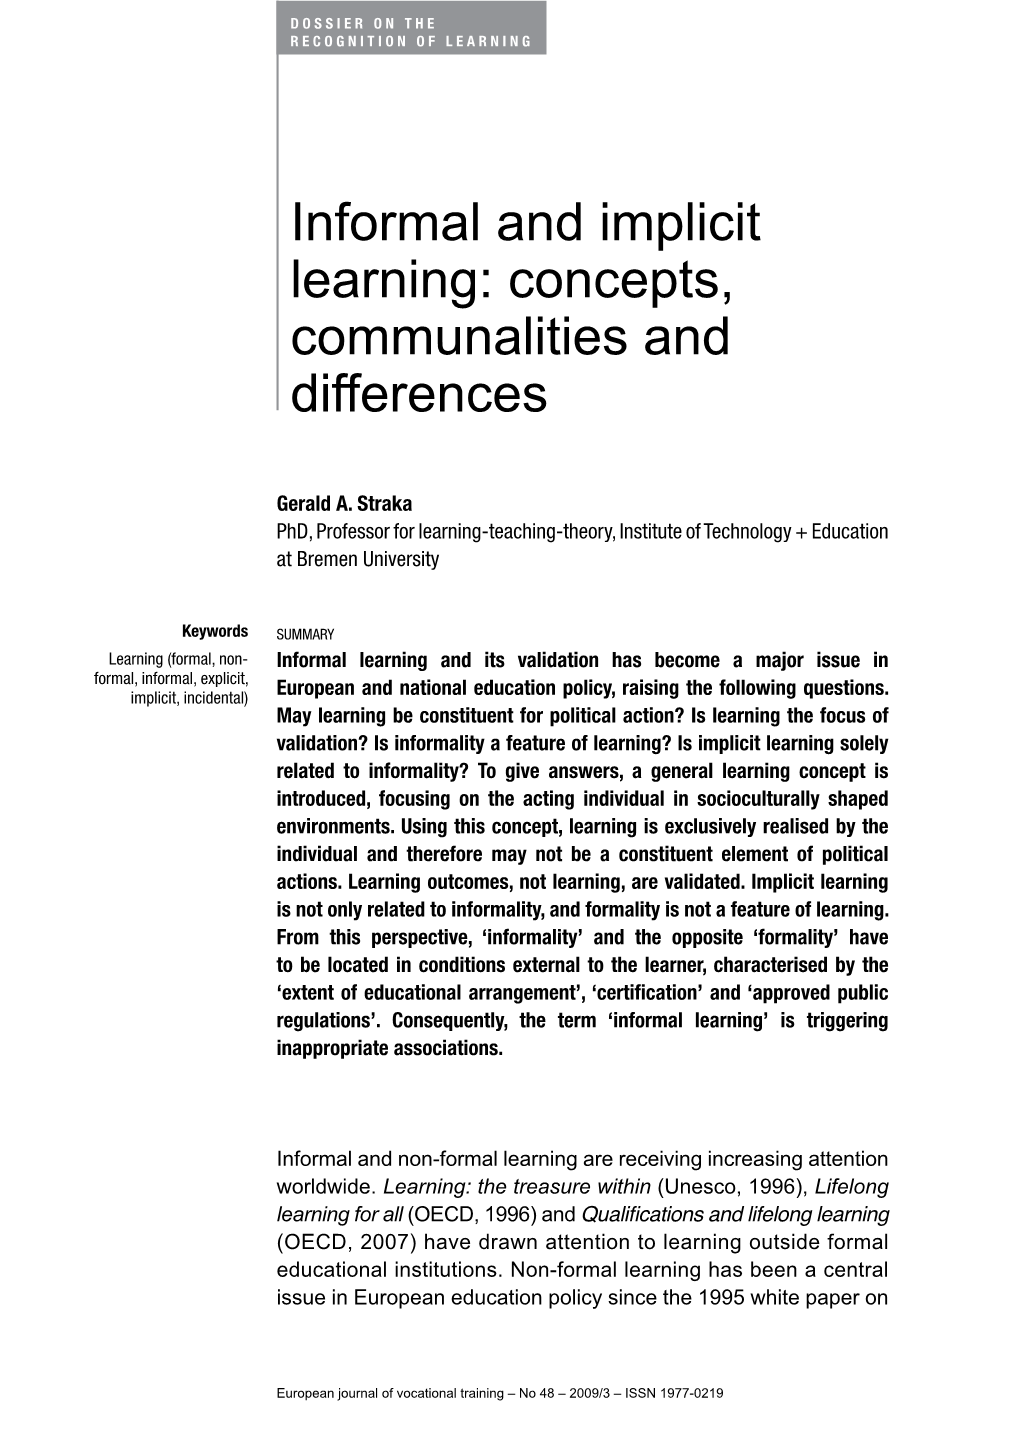 Informal and Implicit Learning: Concepts, Communalities and Differences